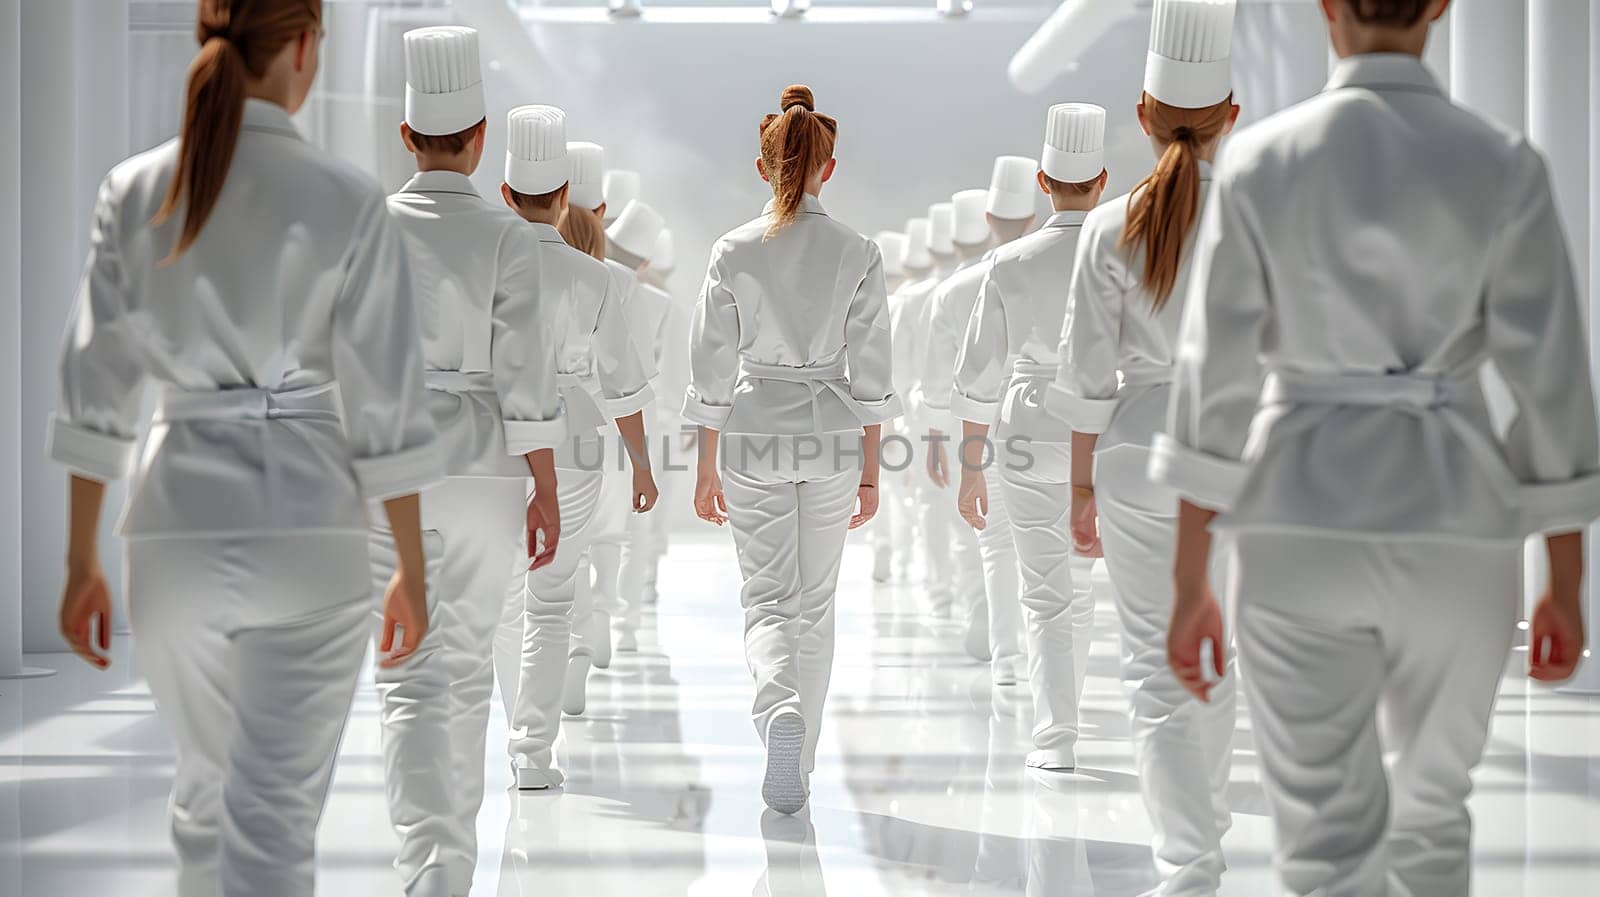 A team of individuals in white uniforms is strolling down a corridor, their sleeves neatly pressed and their gestures synchronized. Their fashion design exudes a sense of unity and professionalism